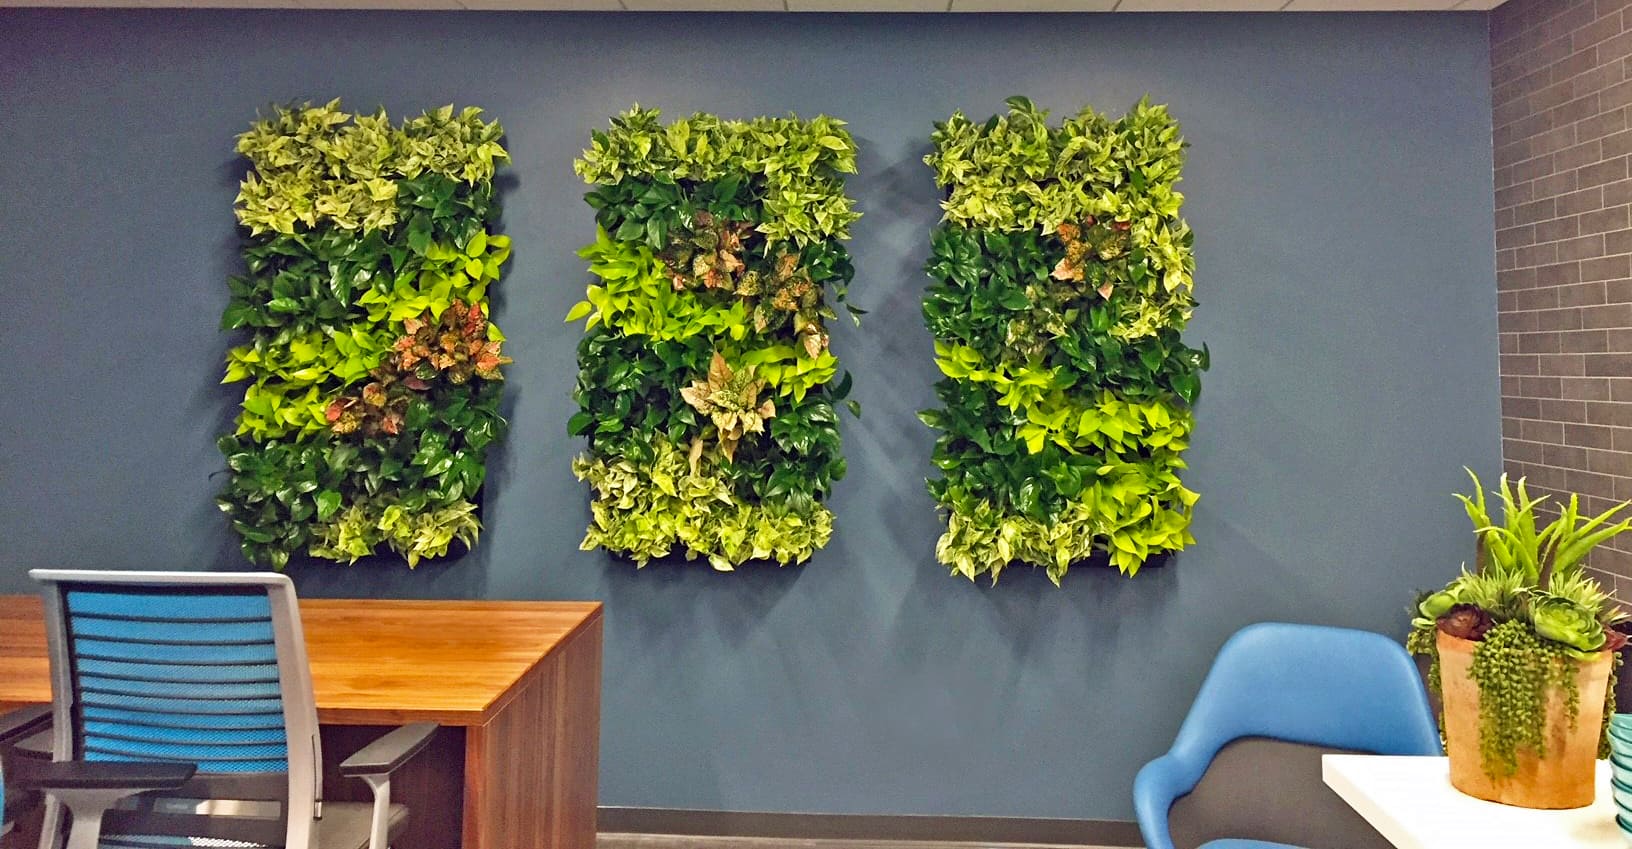 Indoor environments become healthier with the presence of plants in containers and hanging on walls as living art..